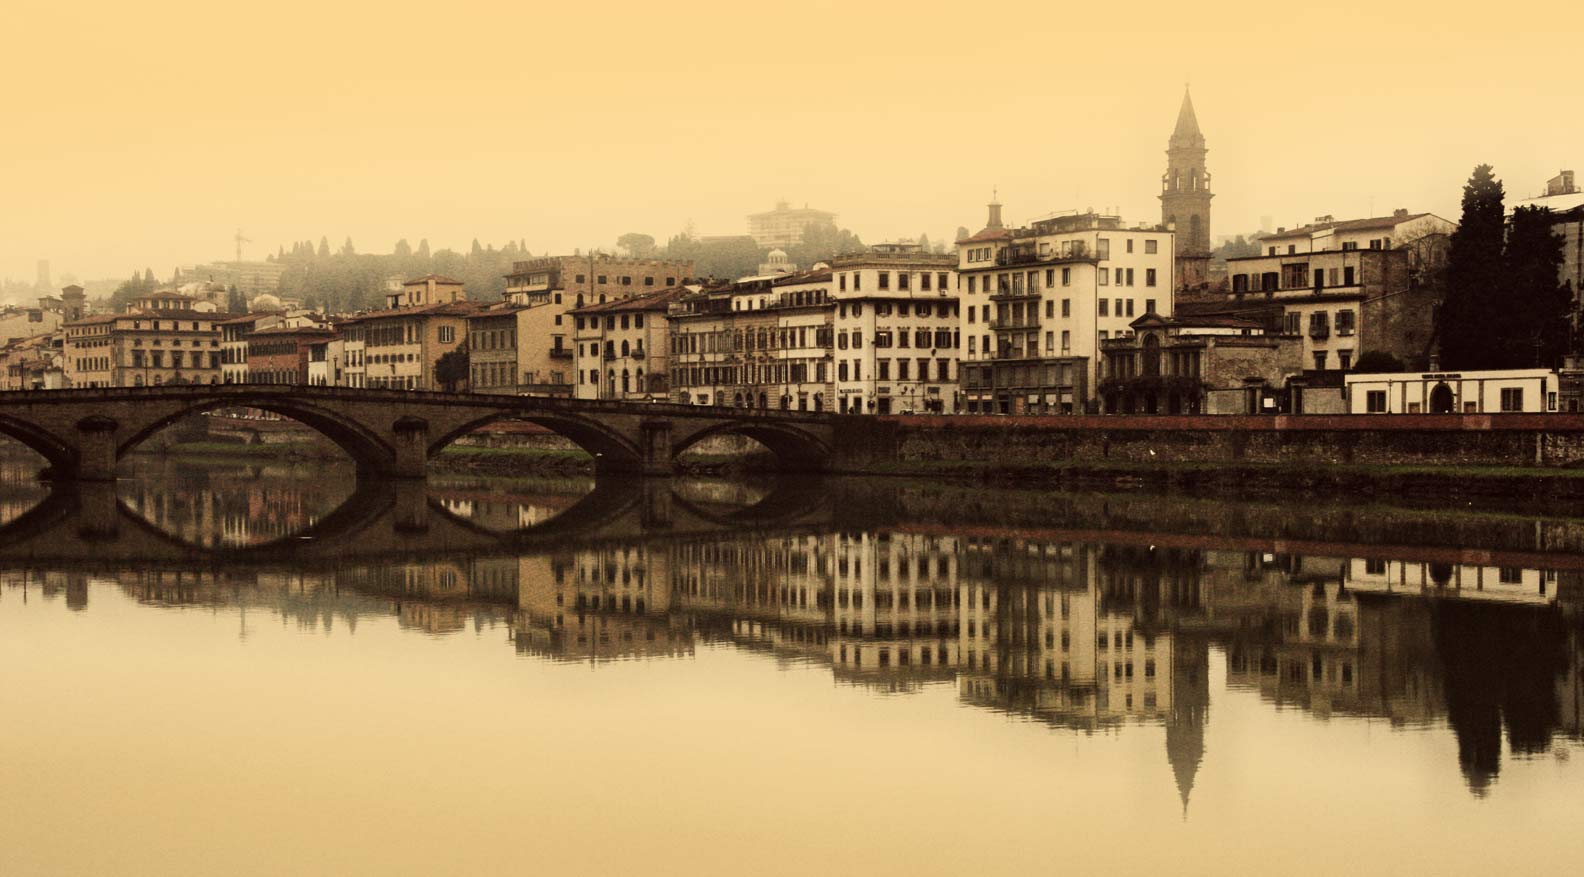 The banks of the River Arno - Florence, Italy